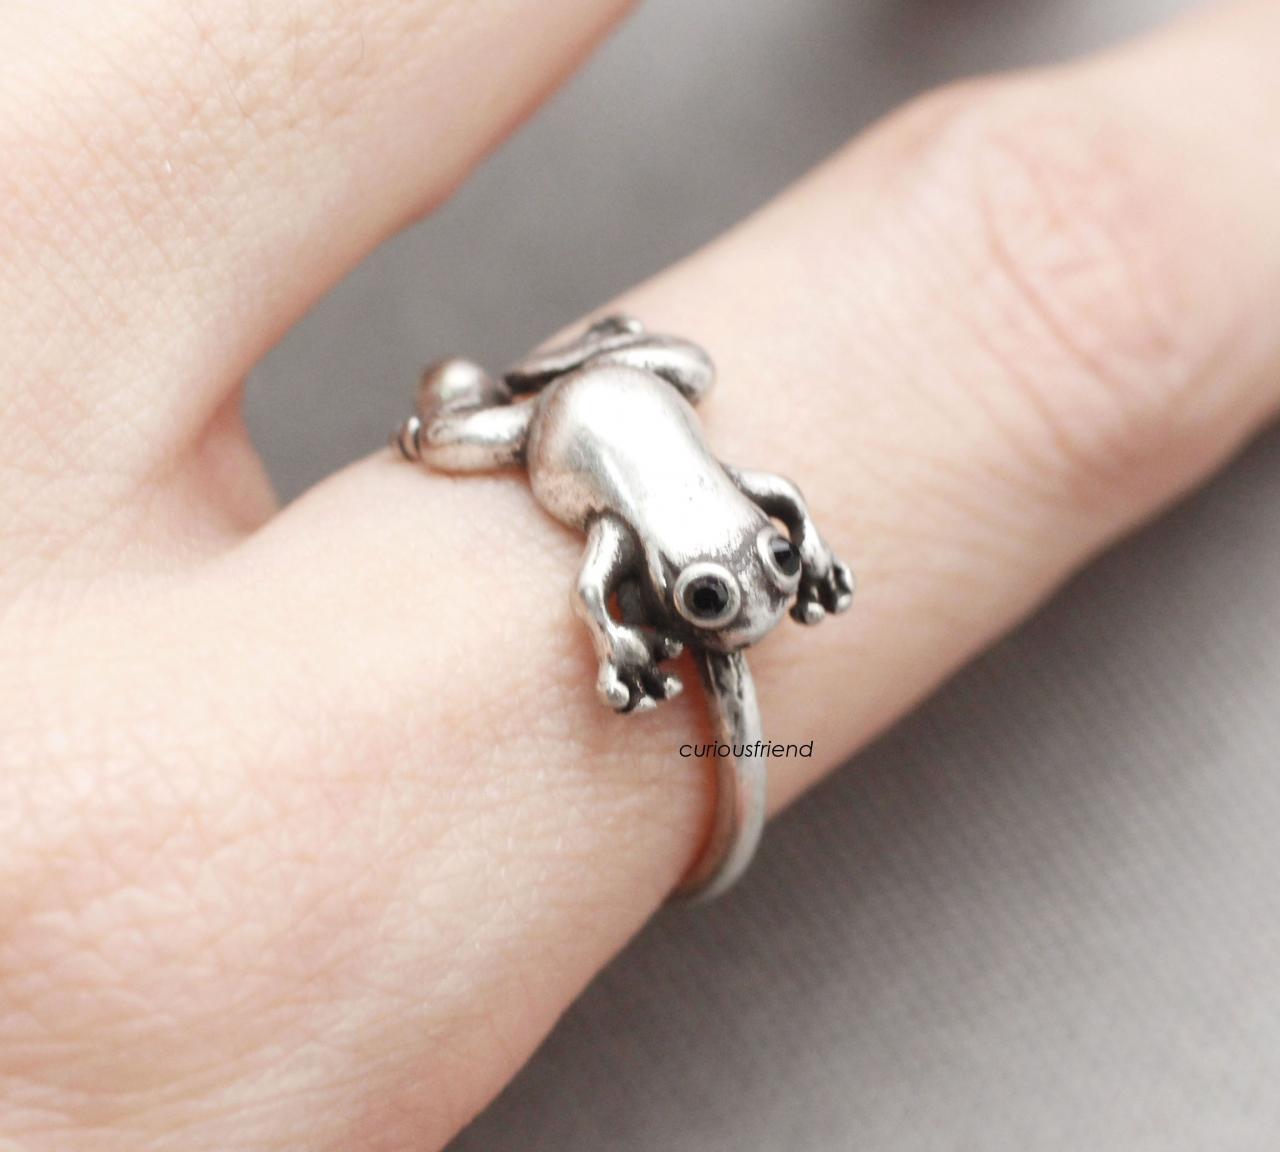 Adjustable Cute Frog Ring,Leap Frog Wrap Ring,Animal Ring, Antique Tone